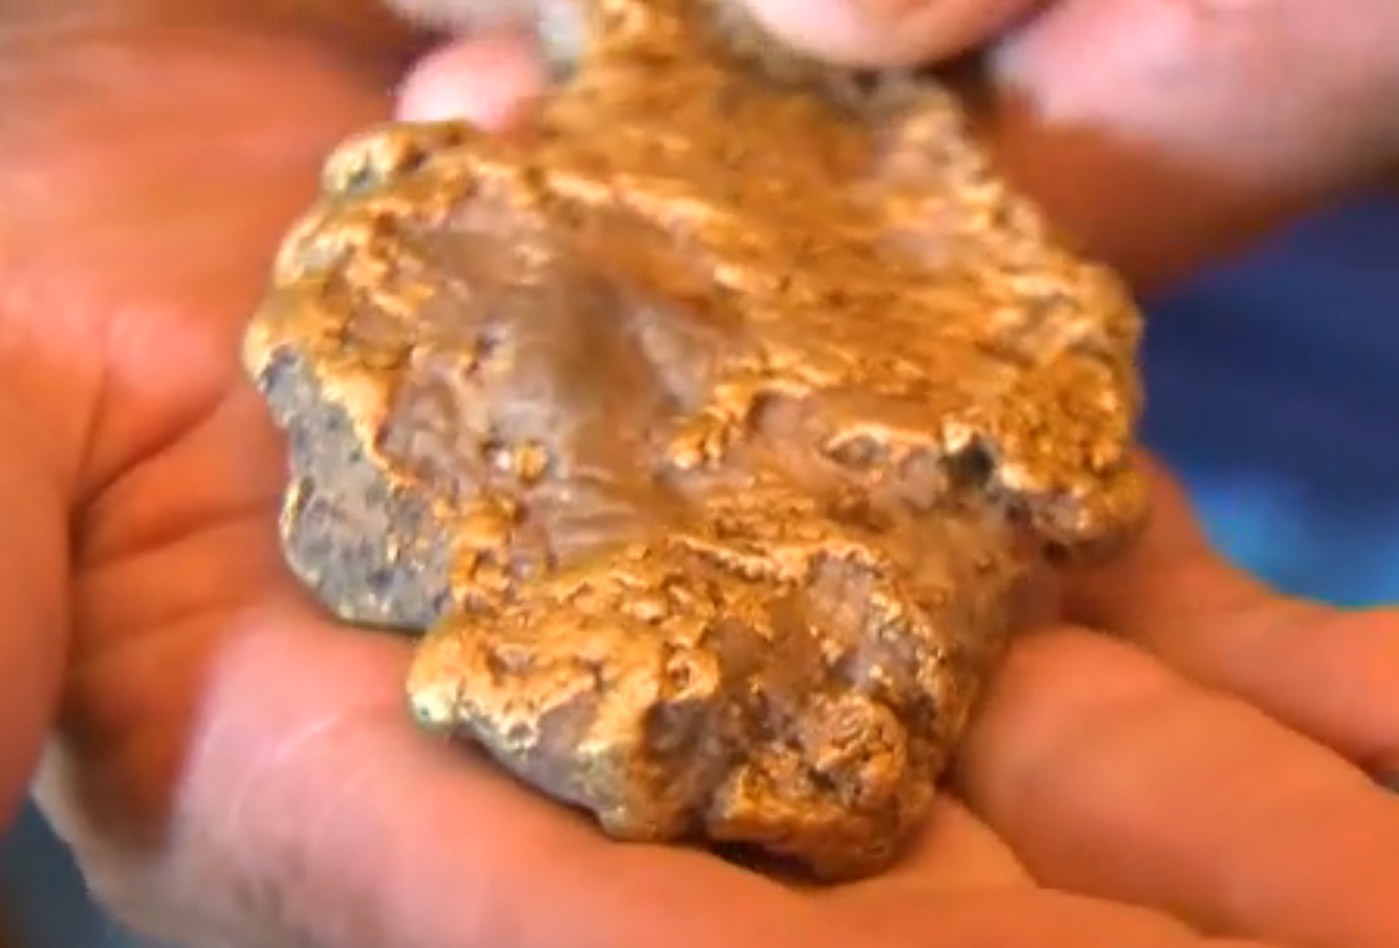 Man Finds Gold Nugget In Tuolumne County